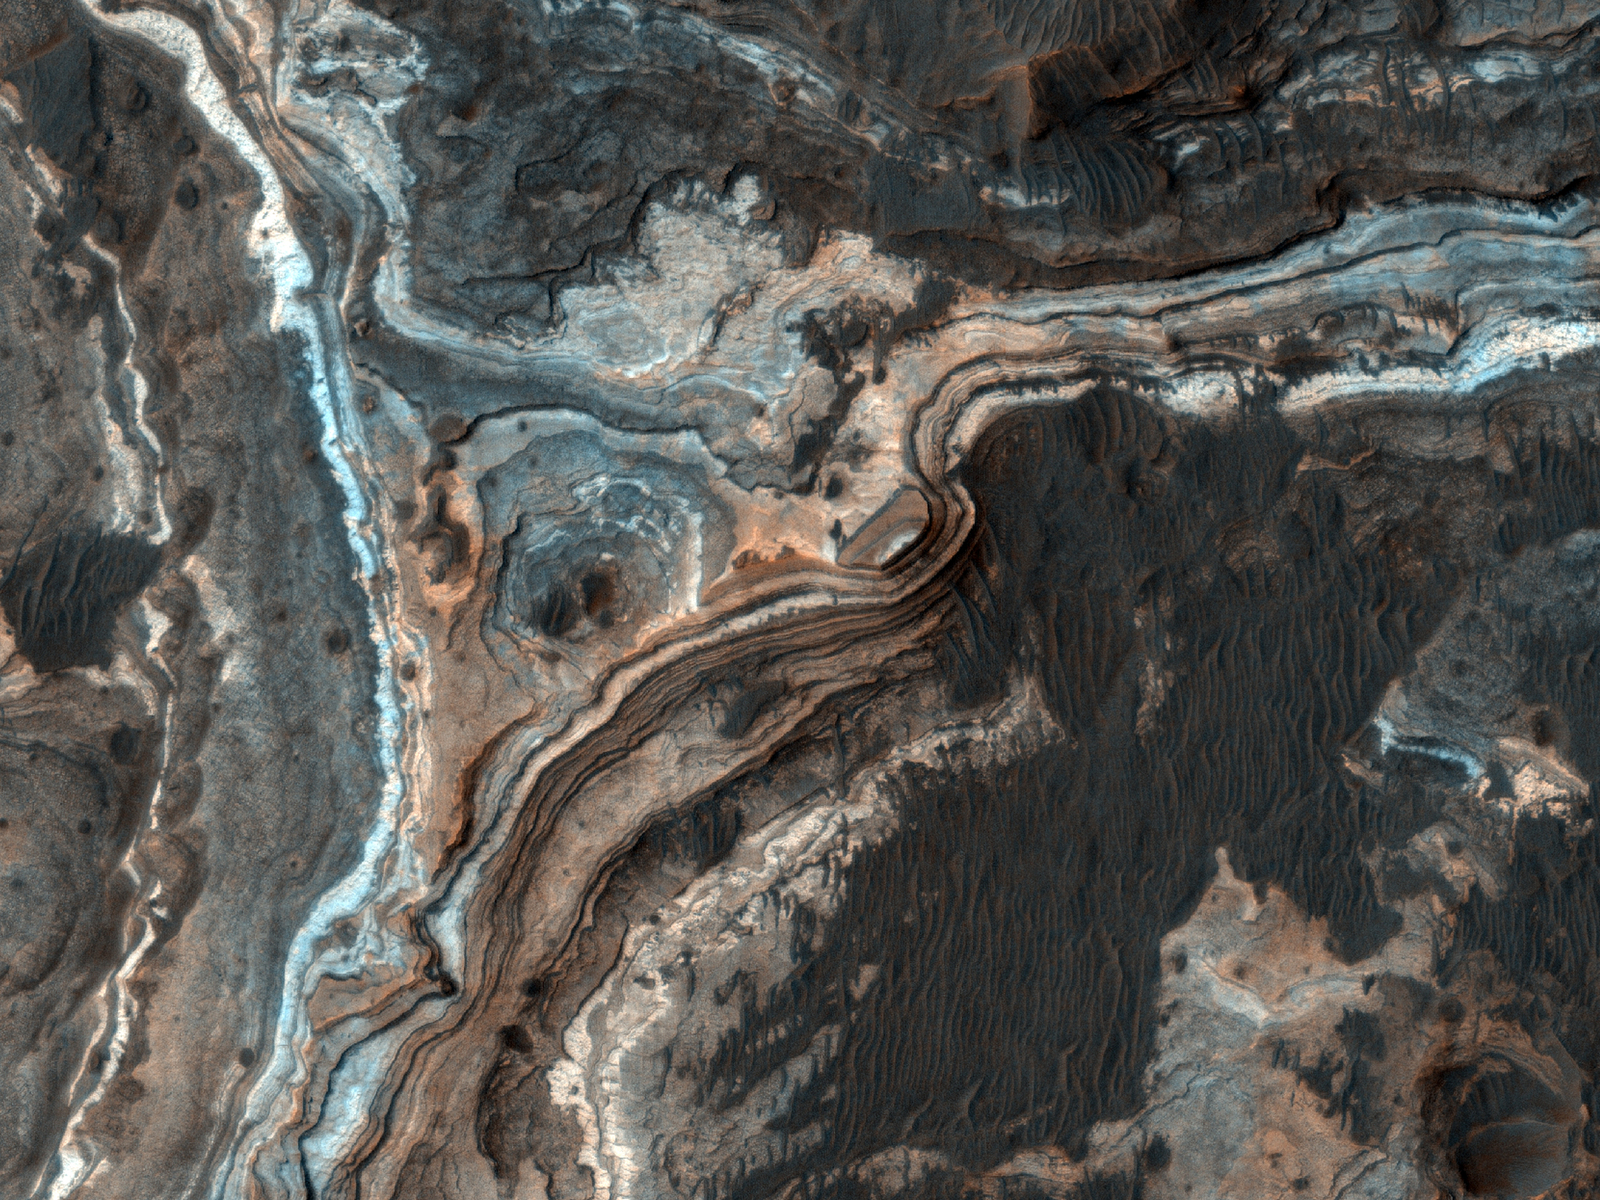 This image shows part of Ladon Vallis, a long outflow channel found in the Southern Highlands on Mars.